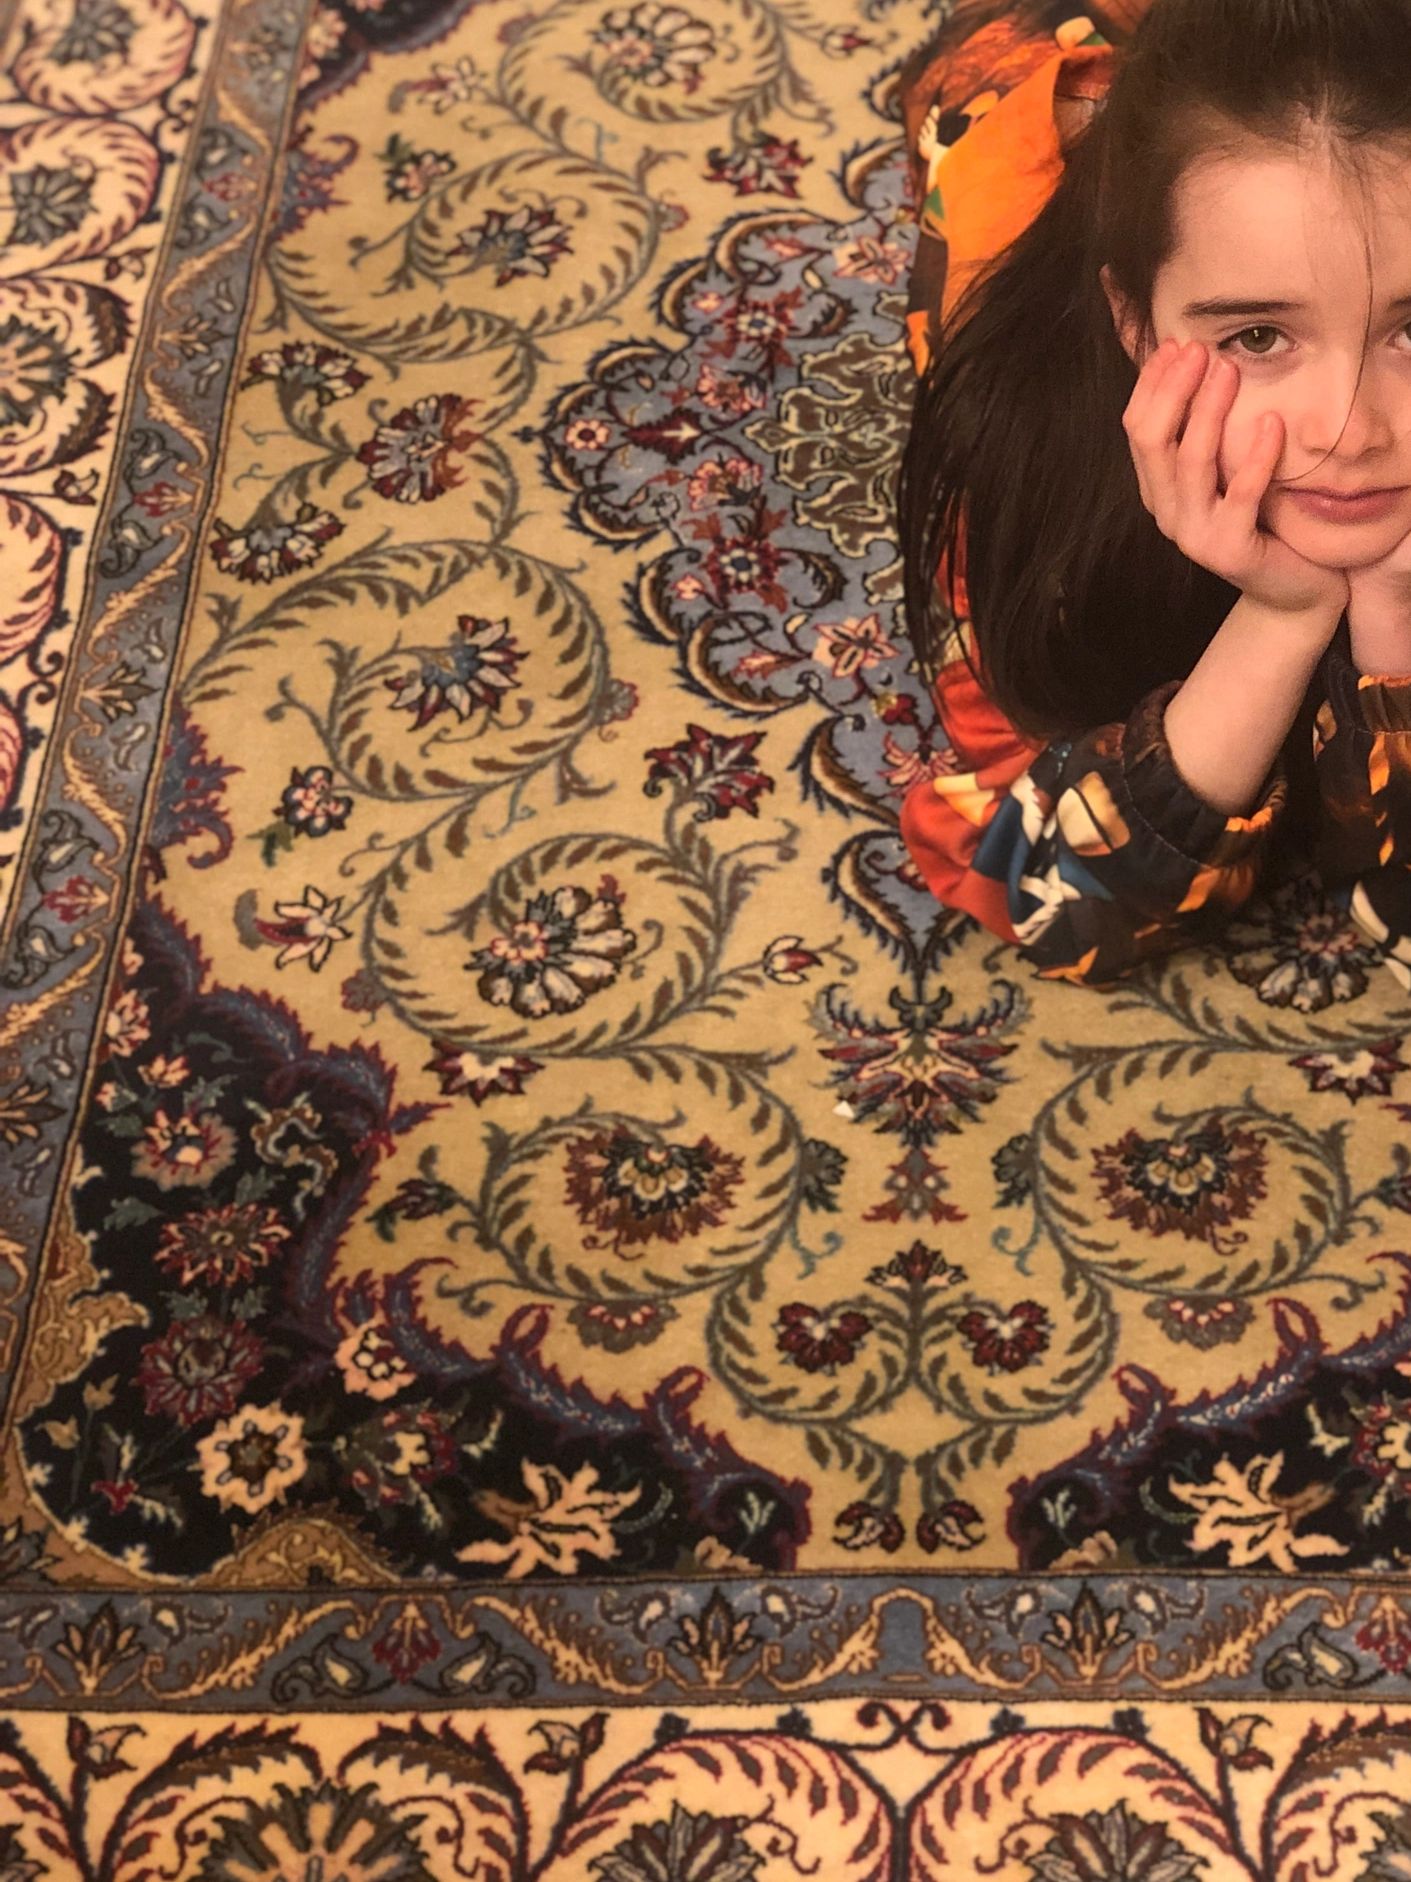 Rug cleaning in Elkridge, MD,  Area rug cleaning in Elkridge, md, Oriental rug cleaning in Elkridge 